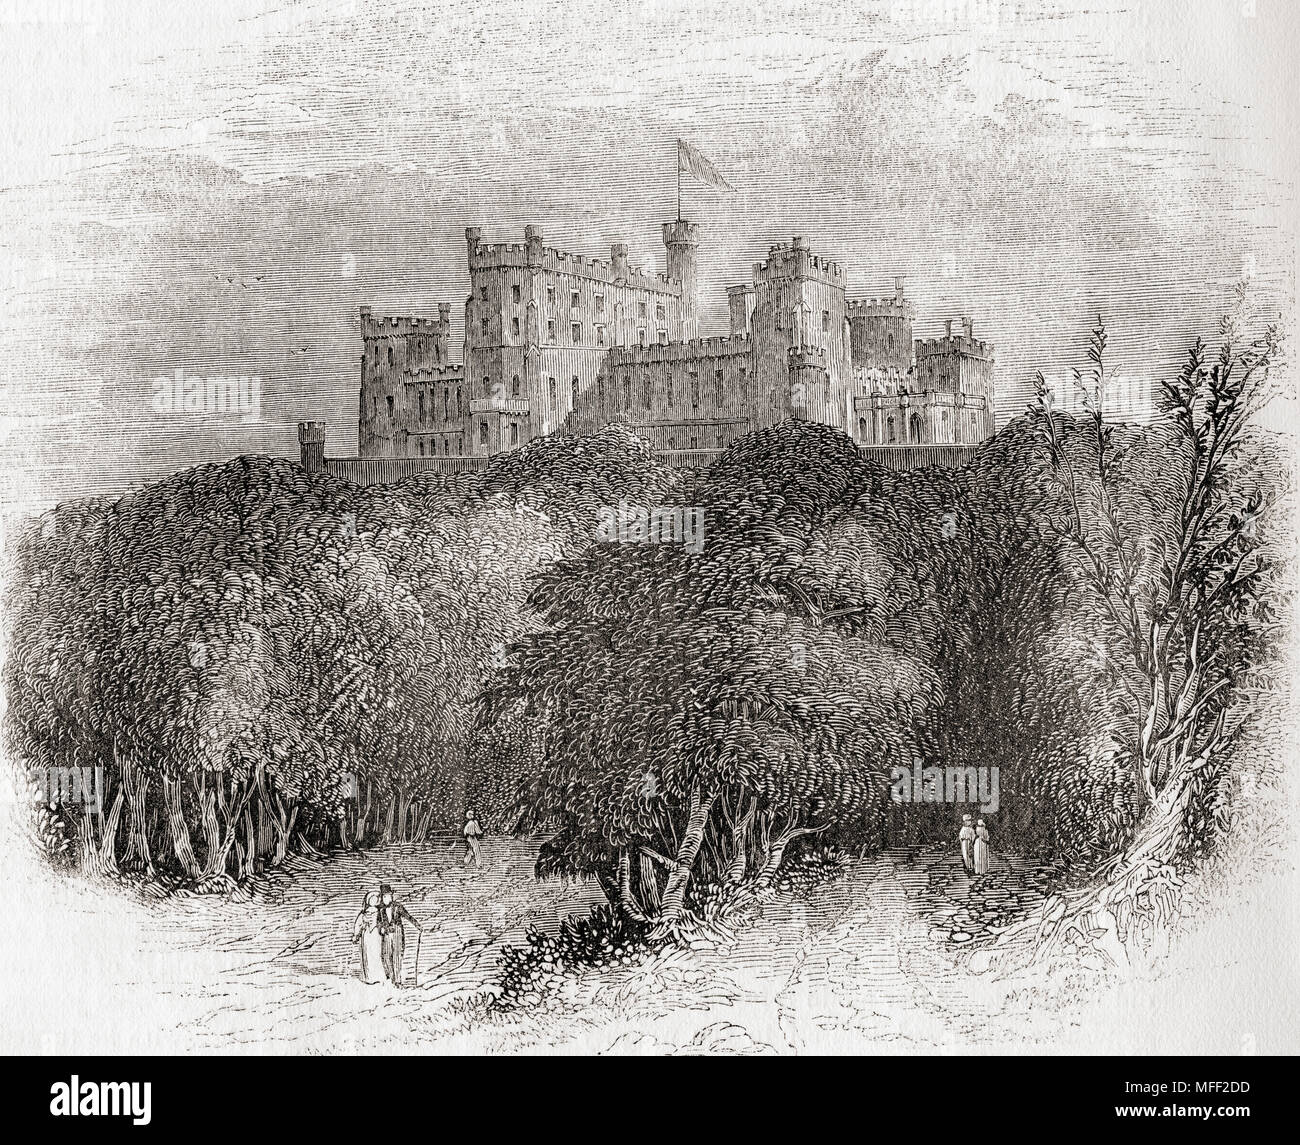 Belvoir Castle, Leicestershire, England during the reign of Charles II. From Old England: A Pictorial Museum, published 1847. Stock Photo